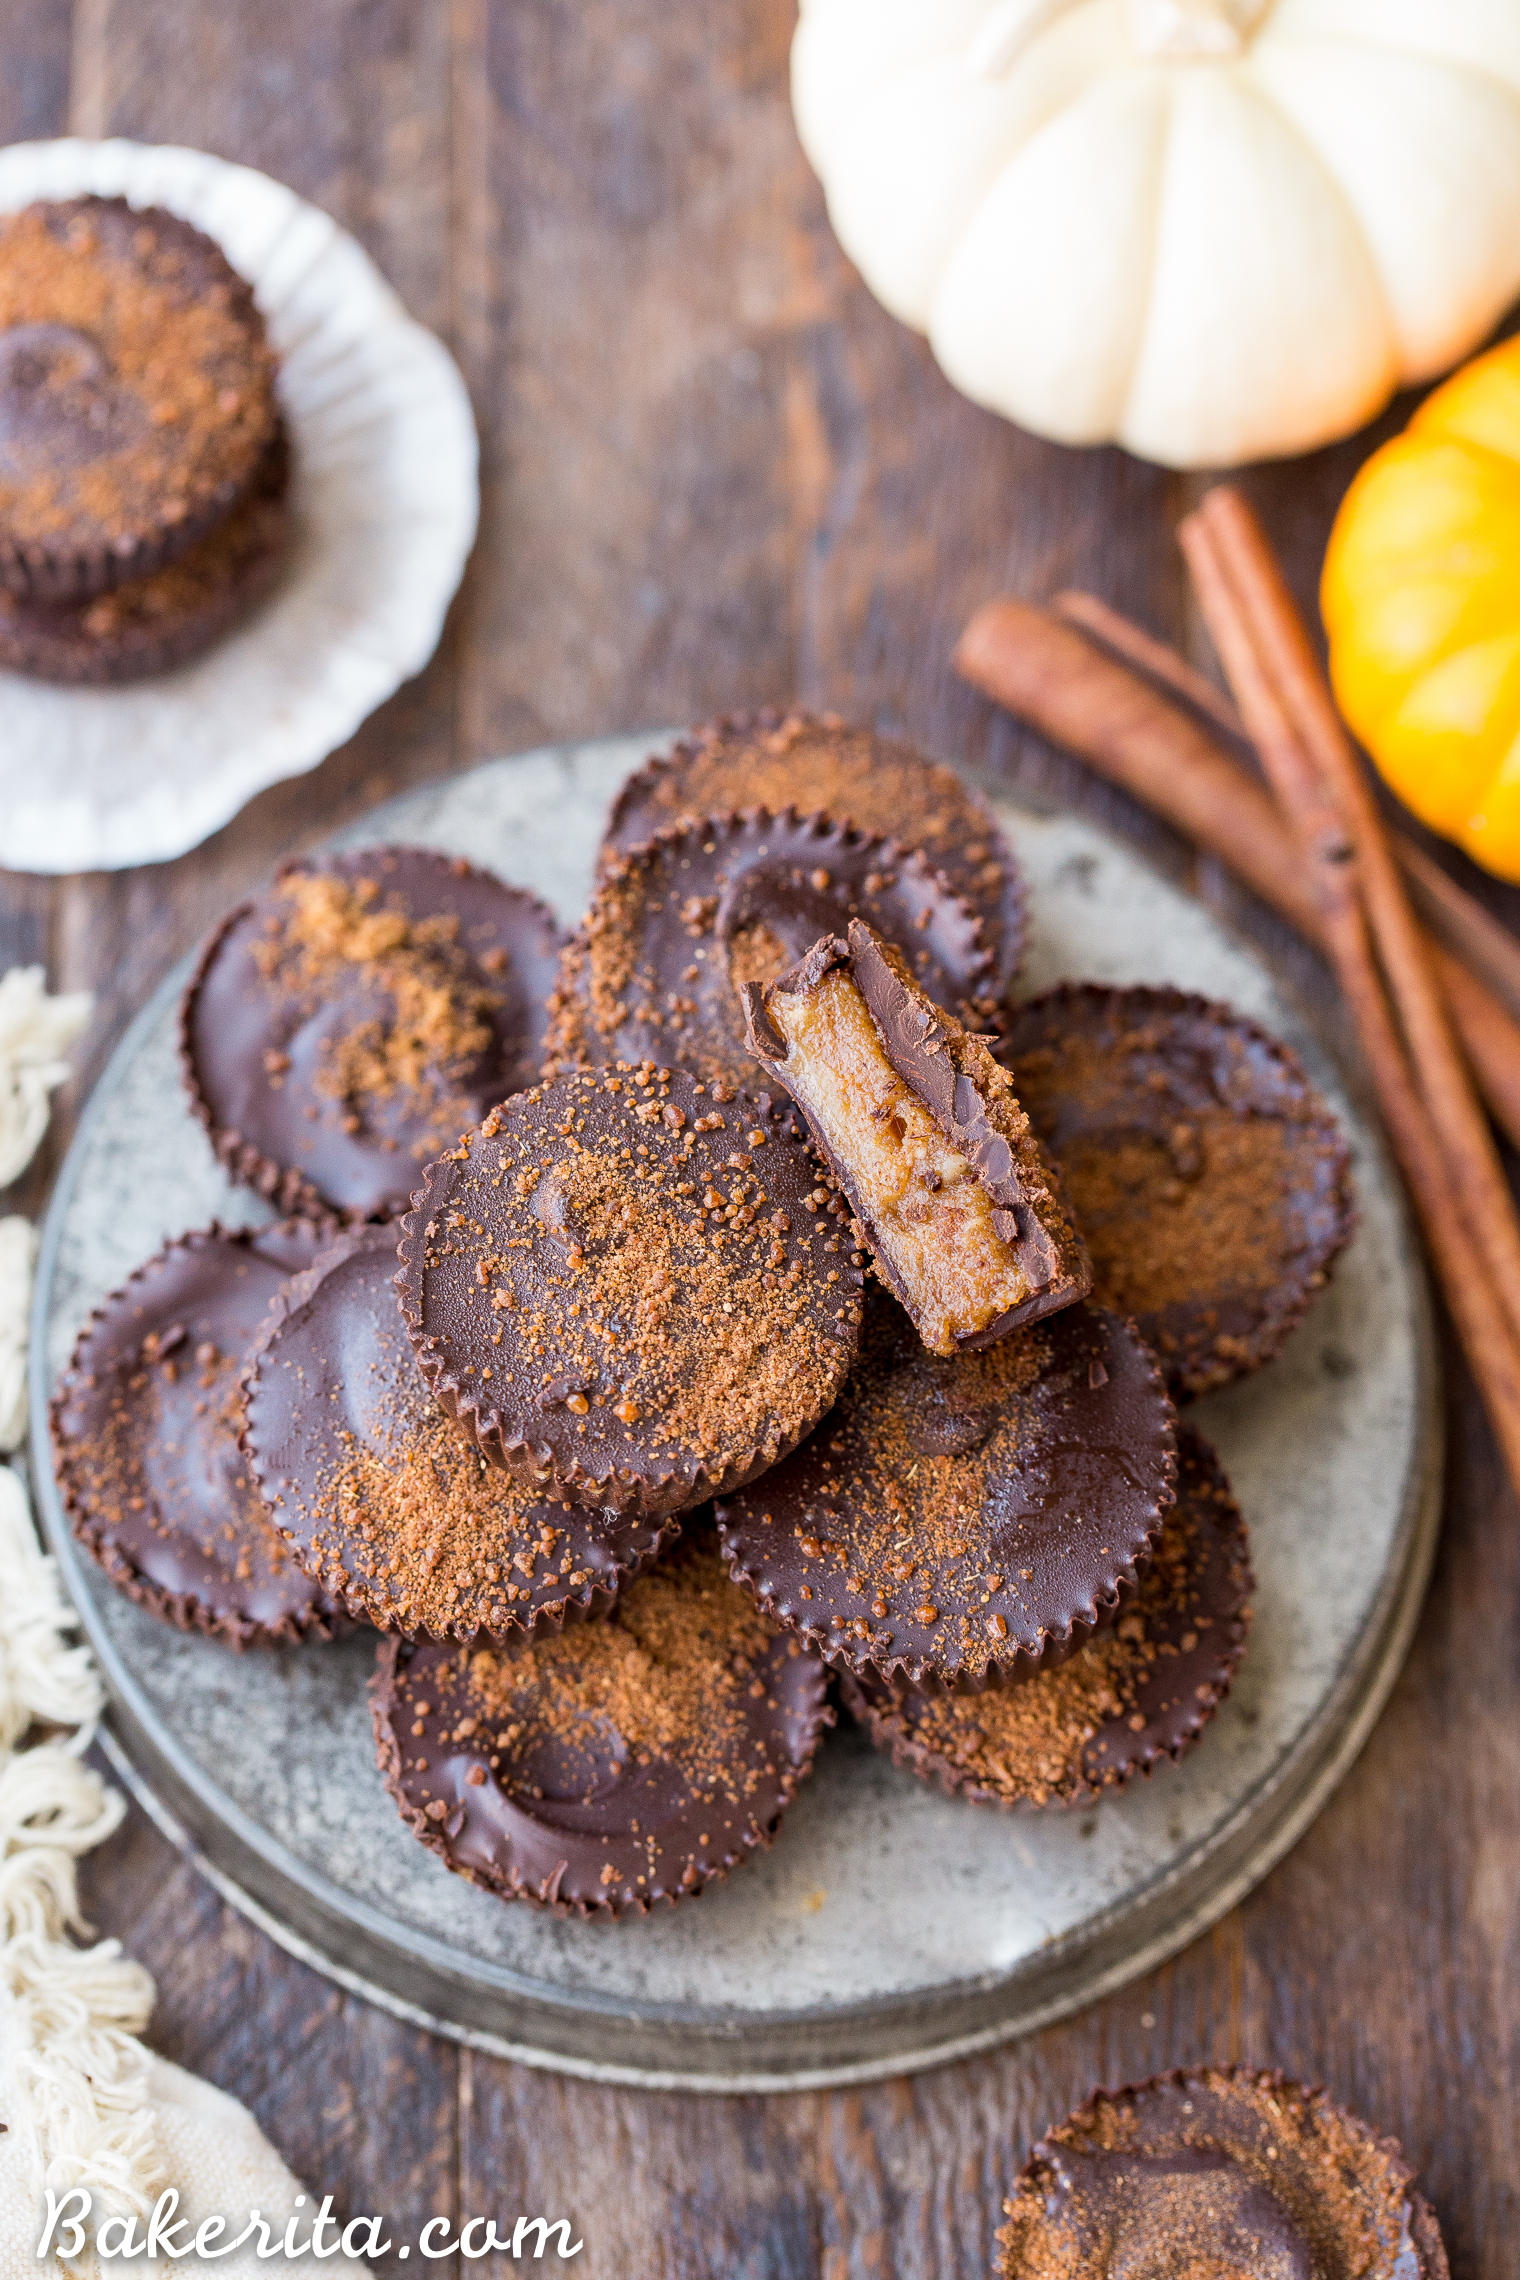 These Chocolate Pumpkin Spice Cups are a gooey, pumpkin spiced twist on the more traditional chocolate cups you know and love. You're going to go nuts for the spiced, caramel-like filling in these gluten free, paleo, and vegan pumpkin spice cups.